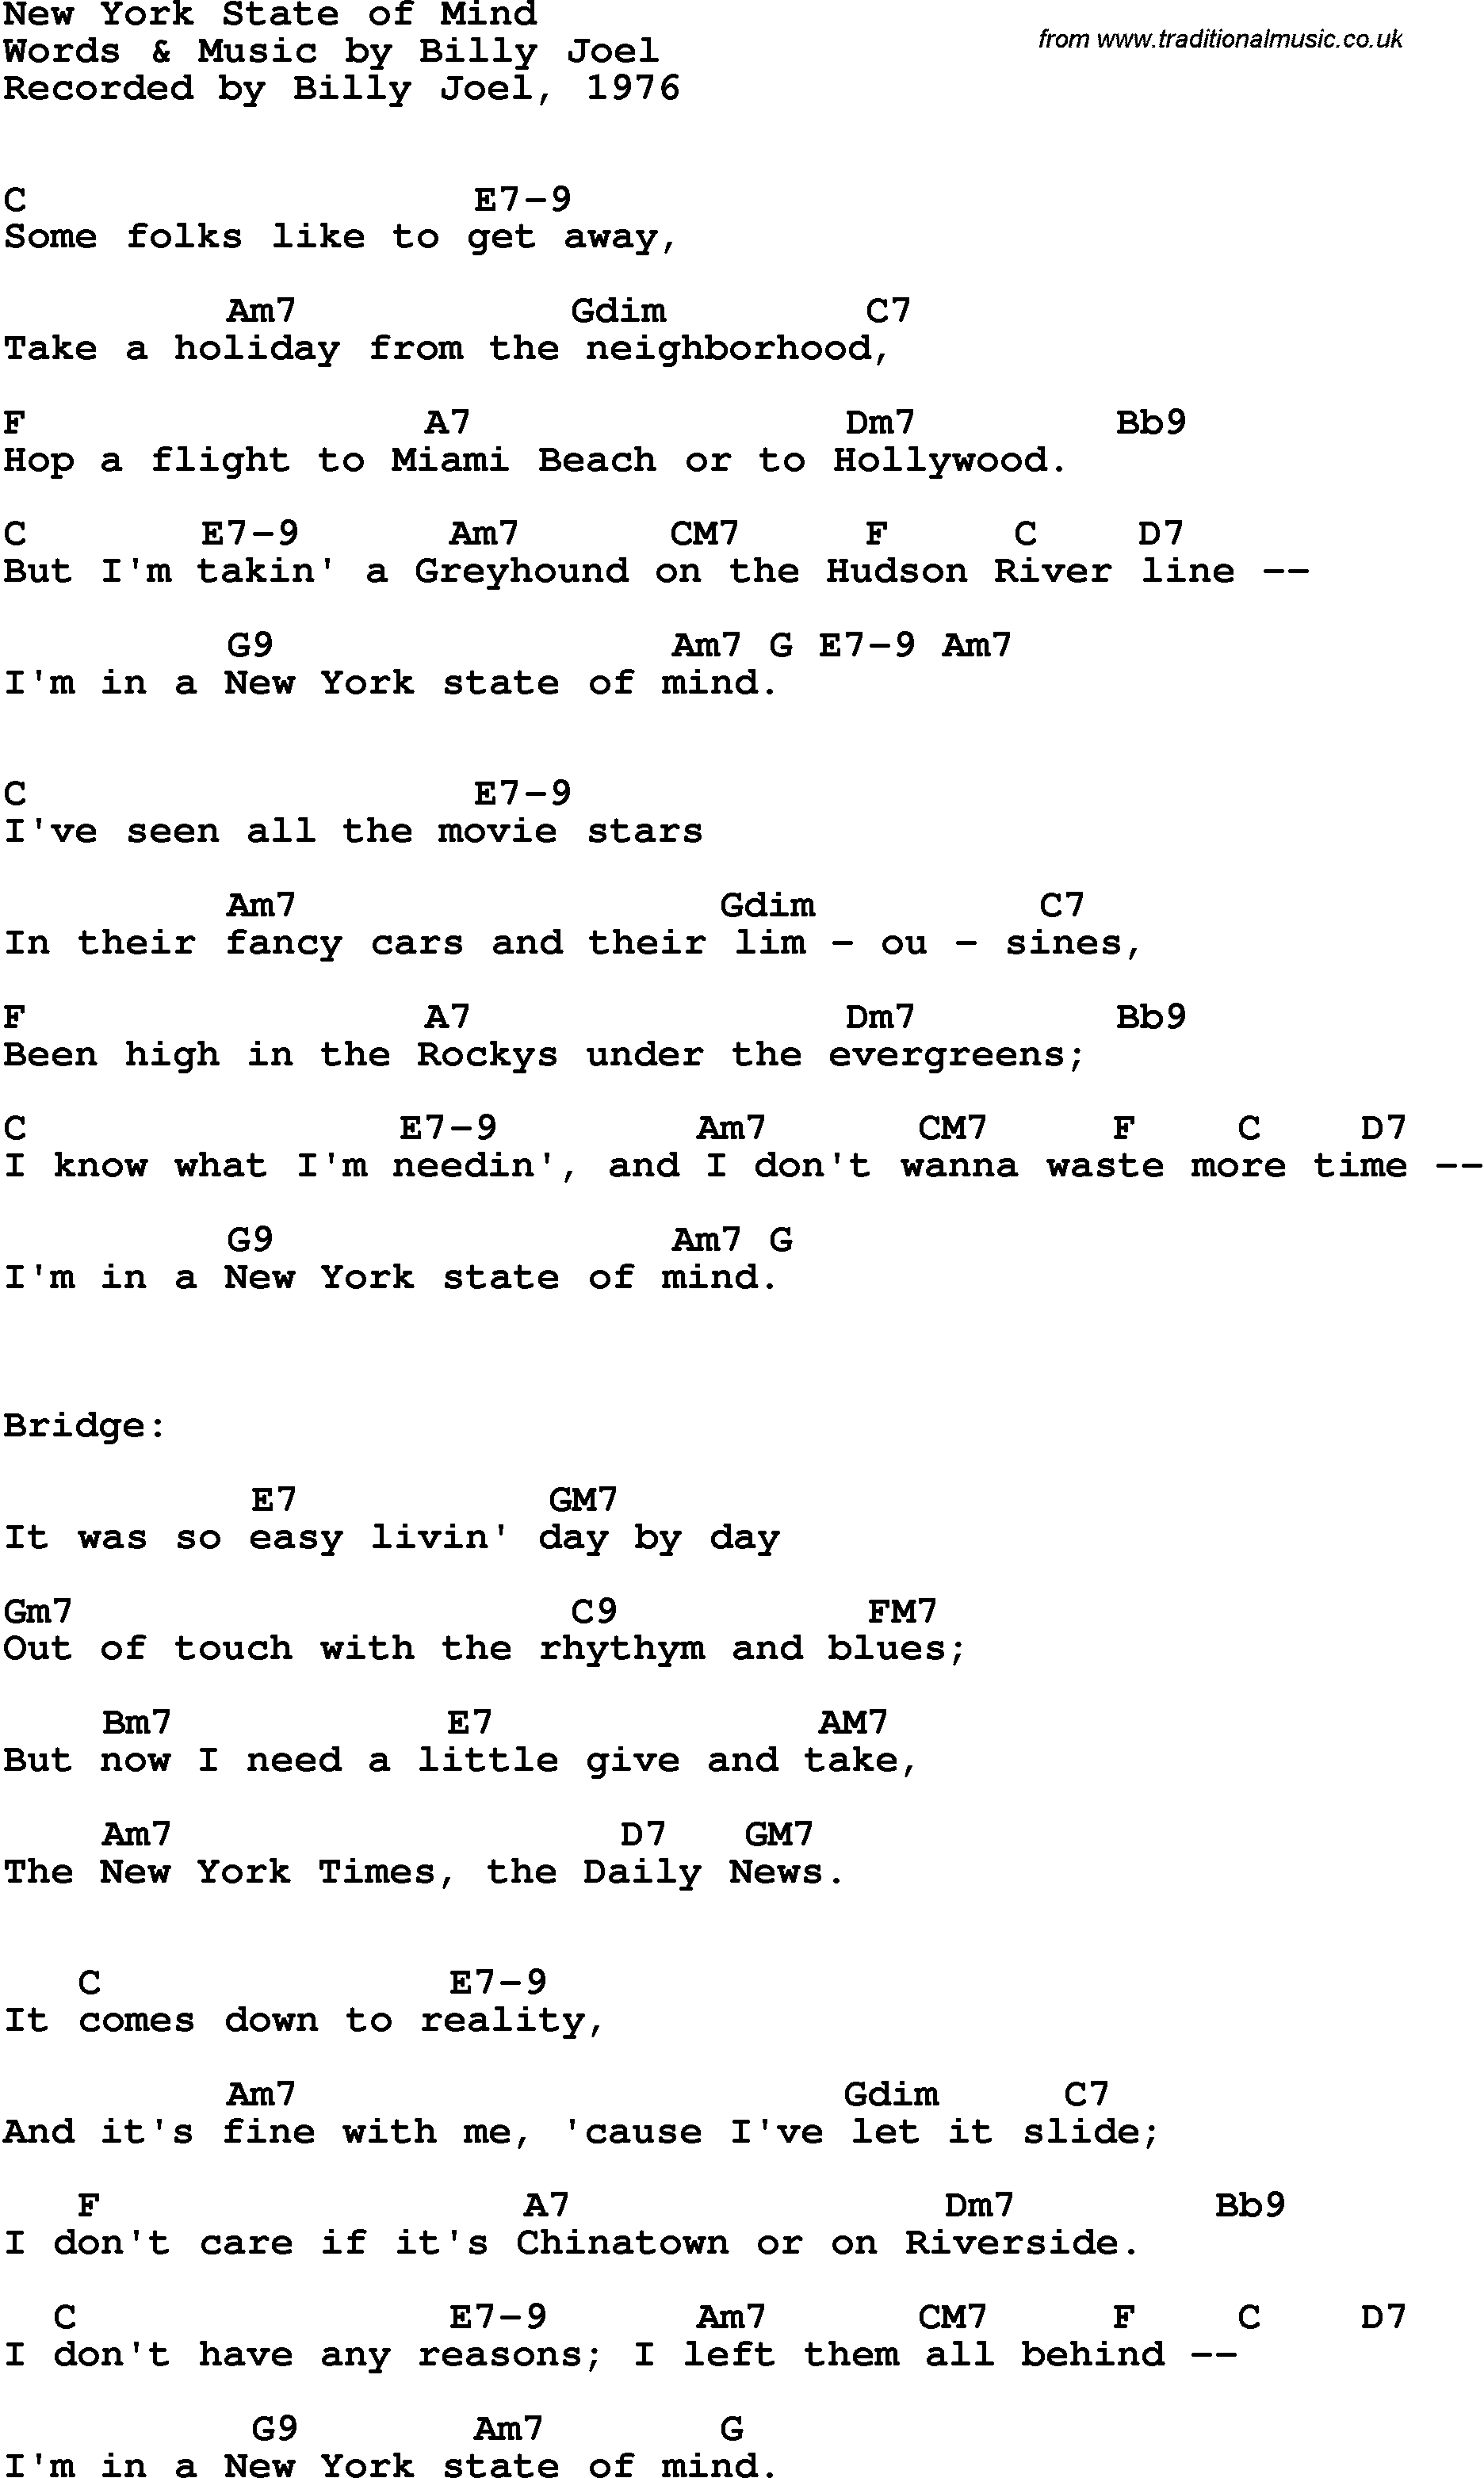 Song Lyrics with guitar chords for New York State Of Mind - Billy Joel, 1976